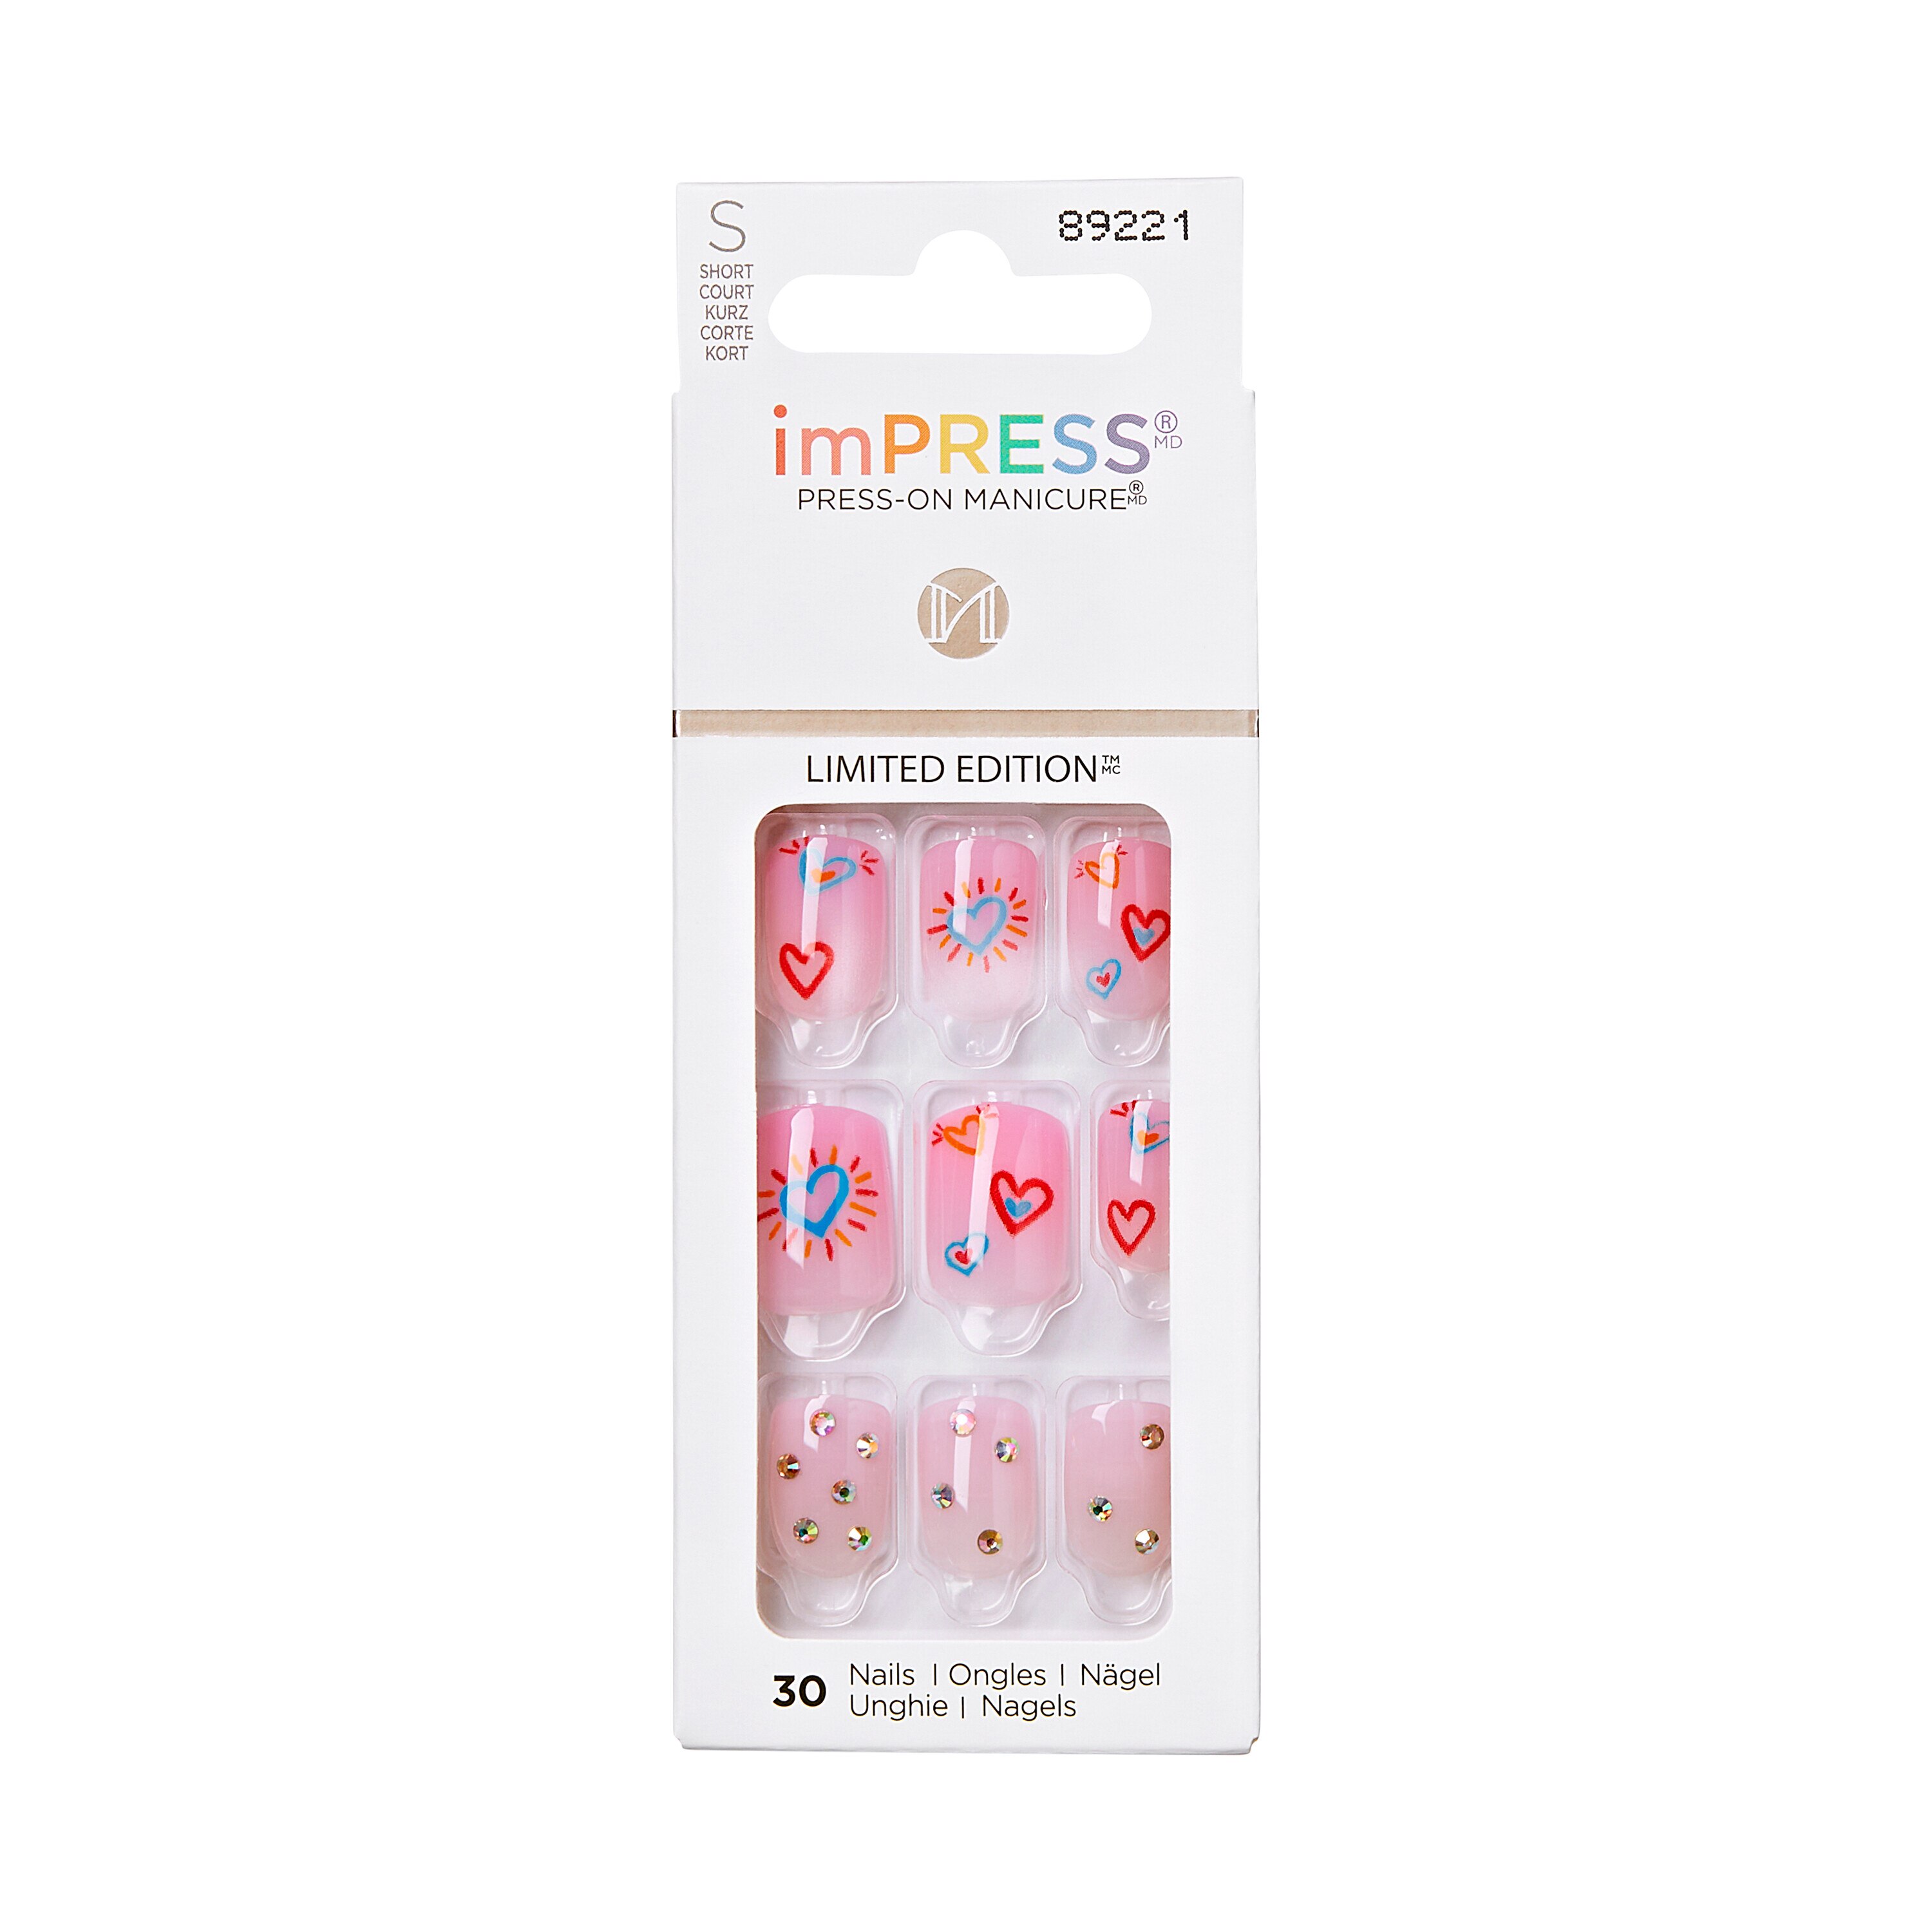 imPRESS Press-On Manicure Limited Edition Pride Nails, Pink, Short, Square, 33 Ct.